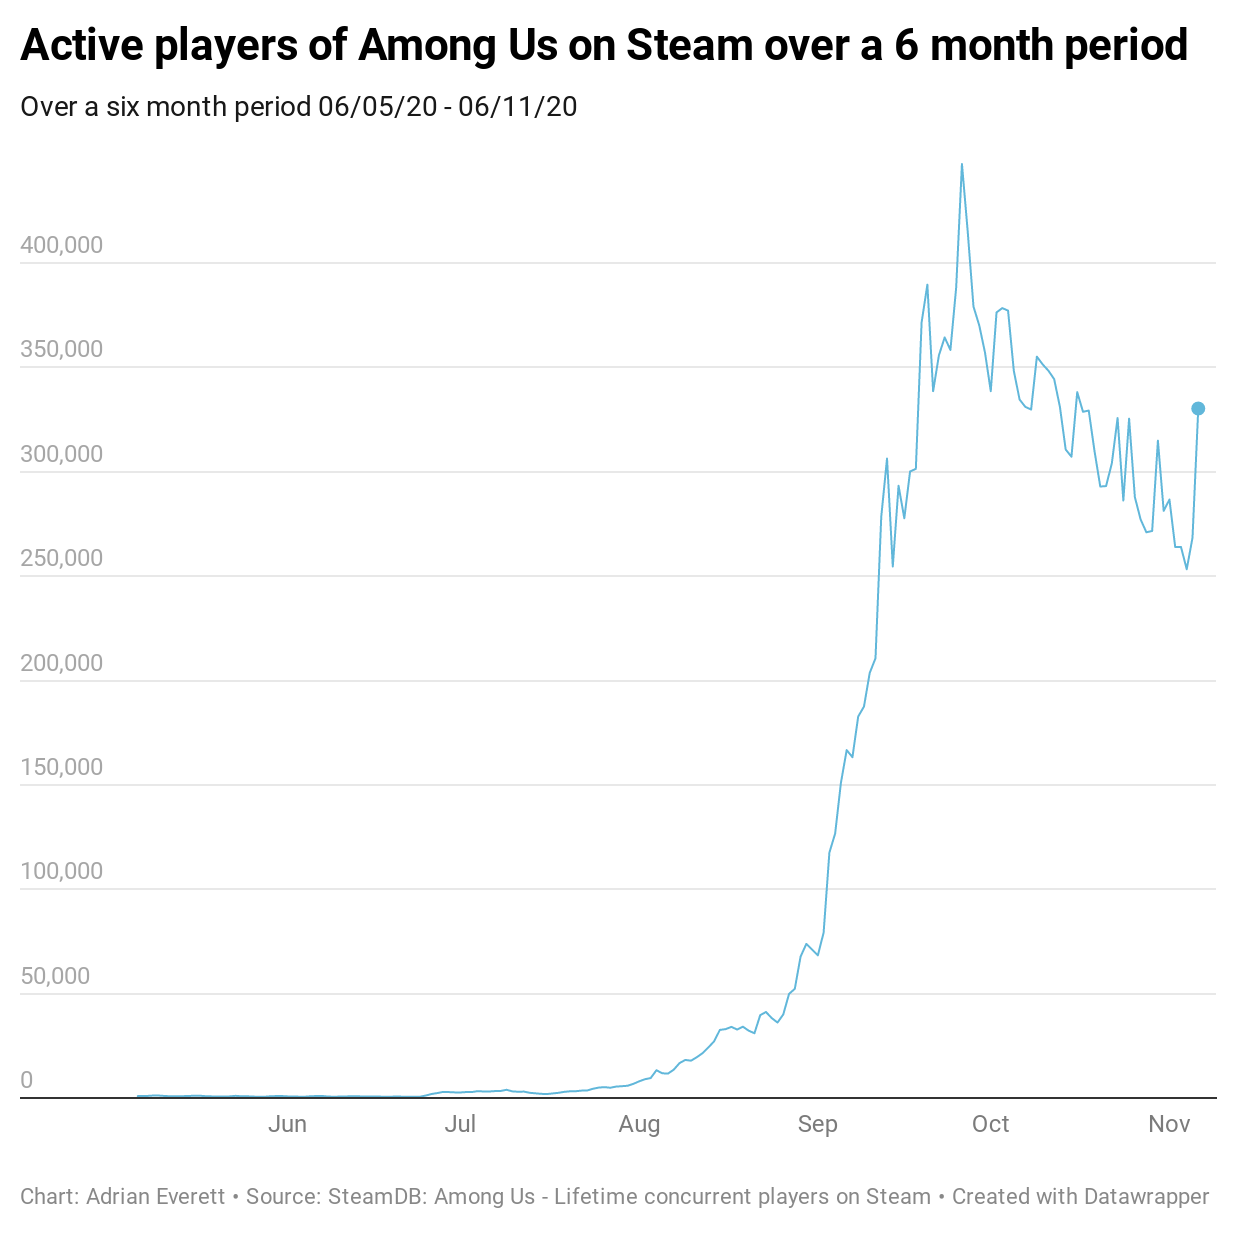 Active players of Among Us on Steam over a 6 month period